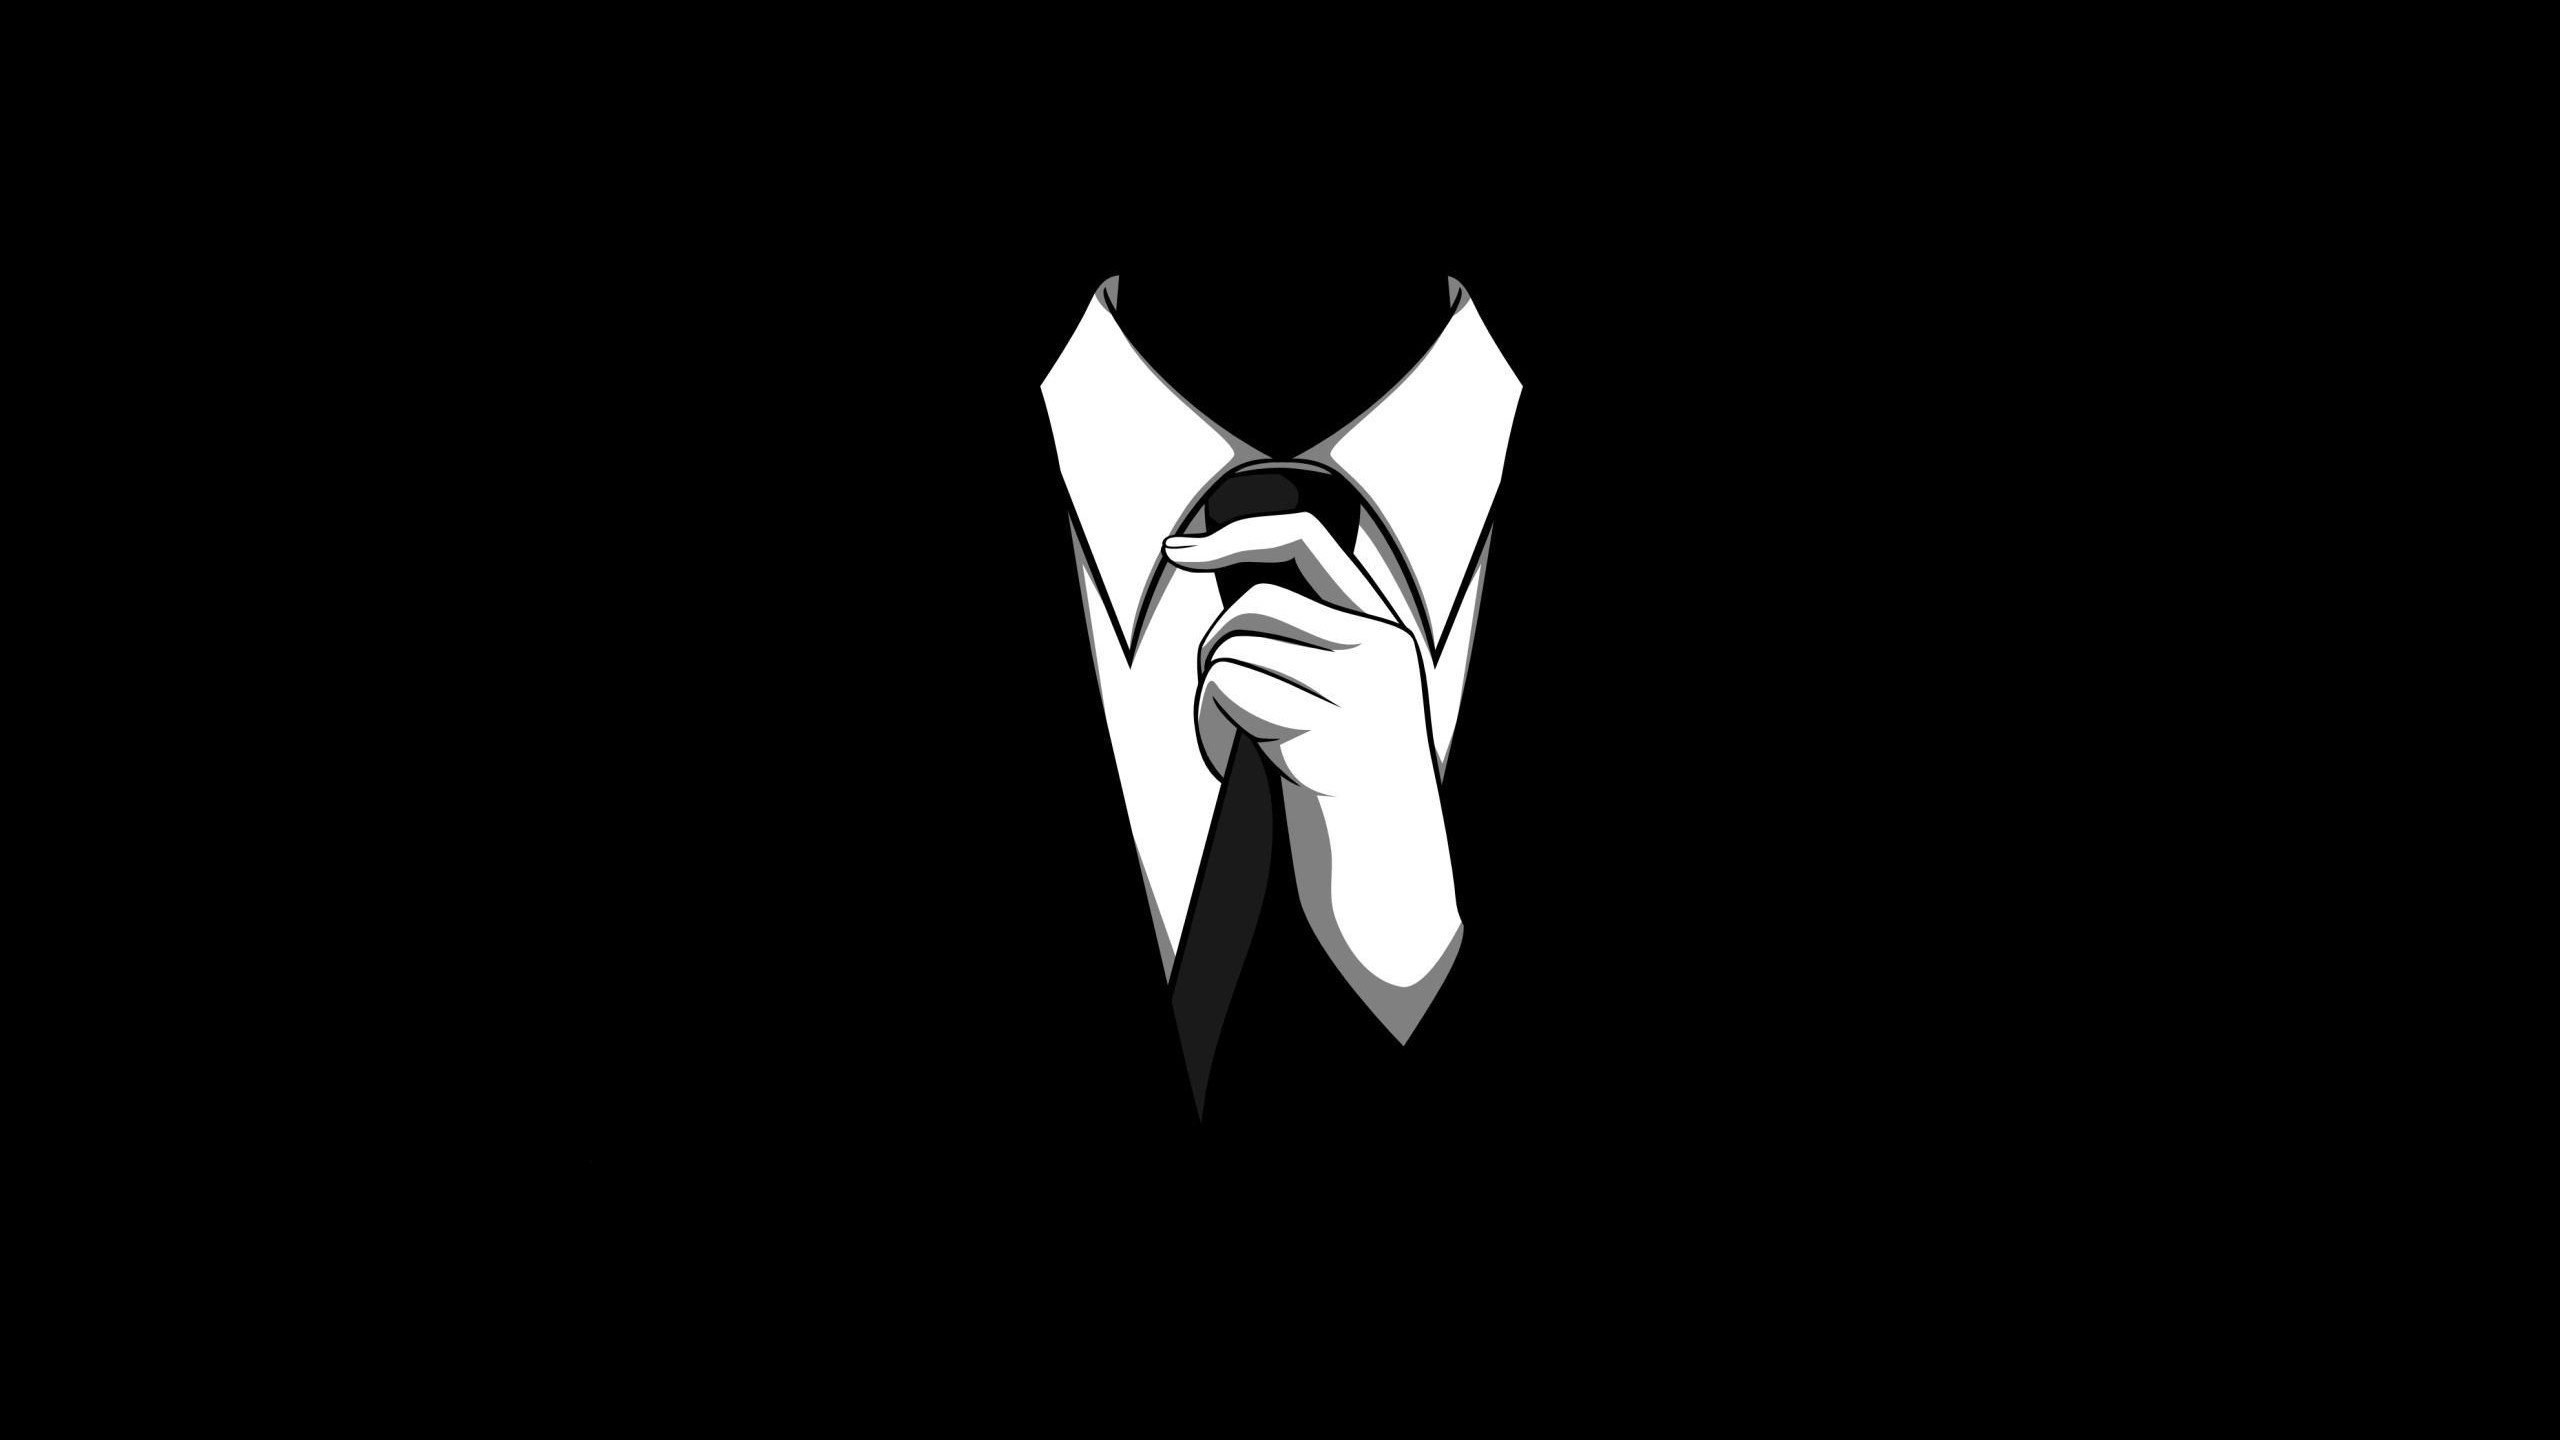 General 2560x1440 Anonymous (hacker group) suits tie popculture simple background artwork black background